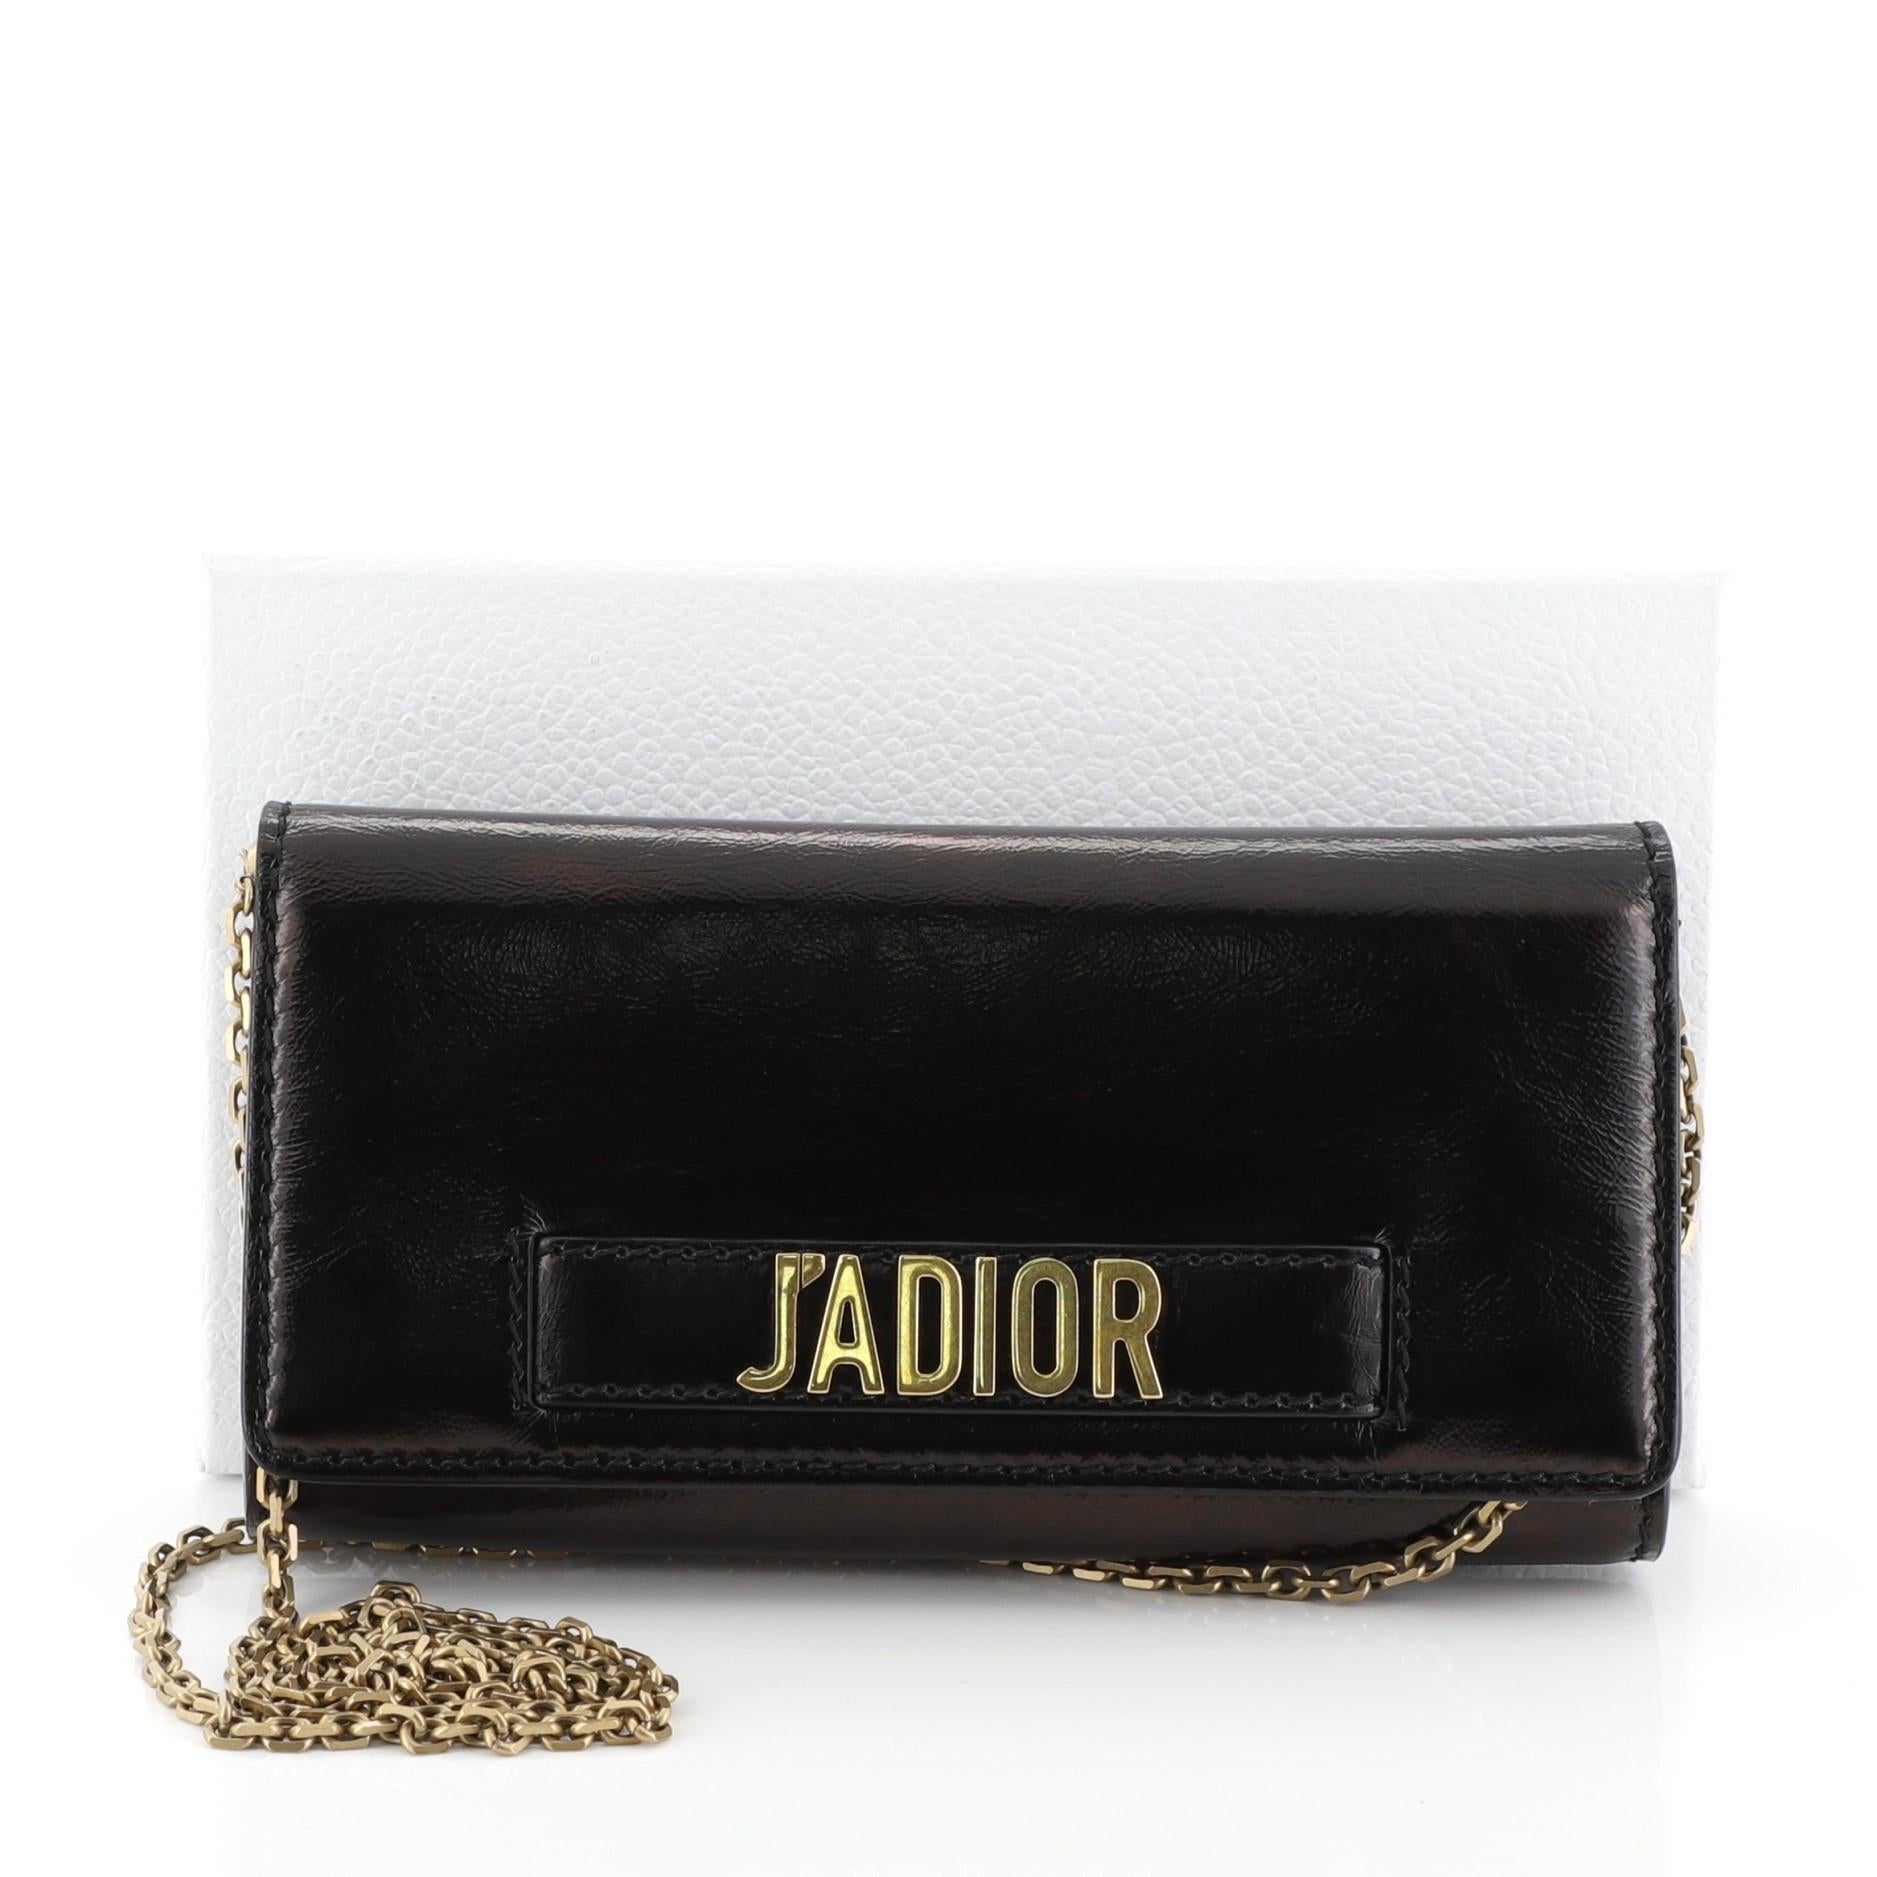 This Christian Dior J'adior Croisiere Chain Wallet Leather, crafted from black leather, features chain link strap, slot handclasp with metal plated J'adior signature, and aged gold-tone hardware. Its flap opens to a black leather interior with